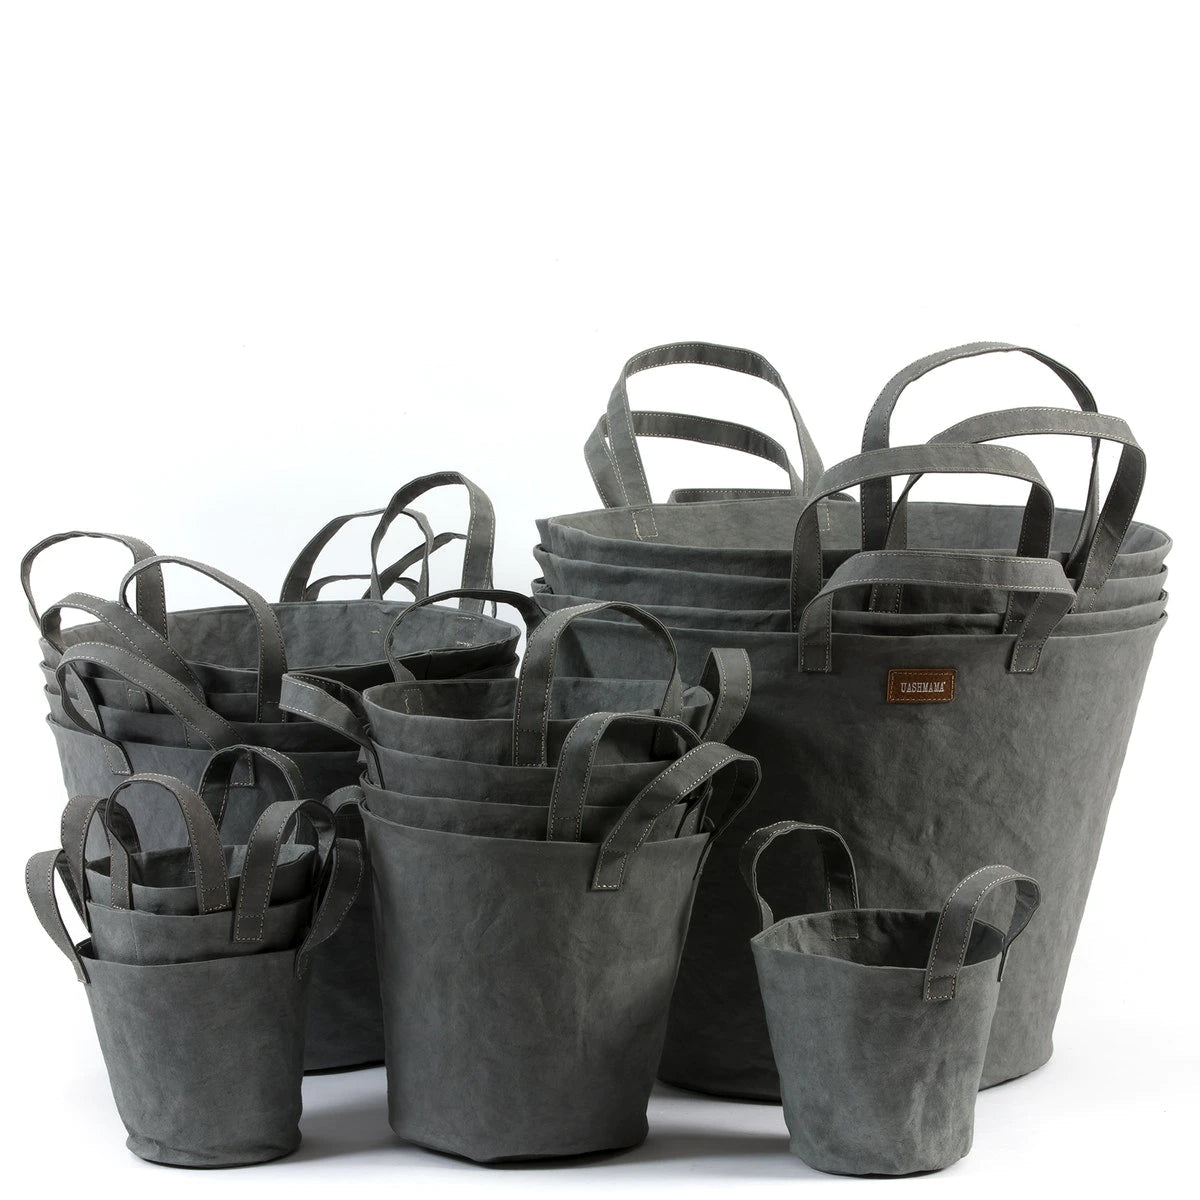 A selection of washable paper baskets are shown stacked in one another, in four varying sizes. They are shown in a dark grey colour.